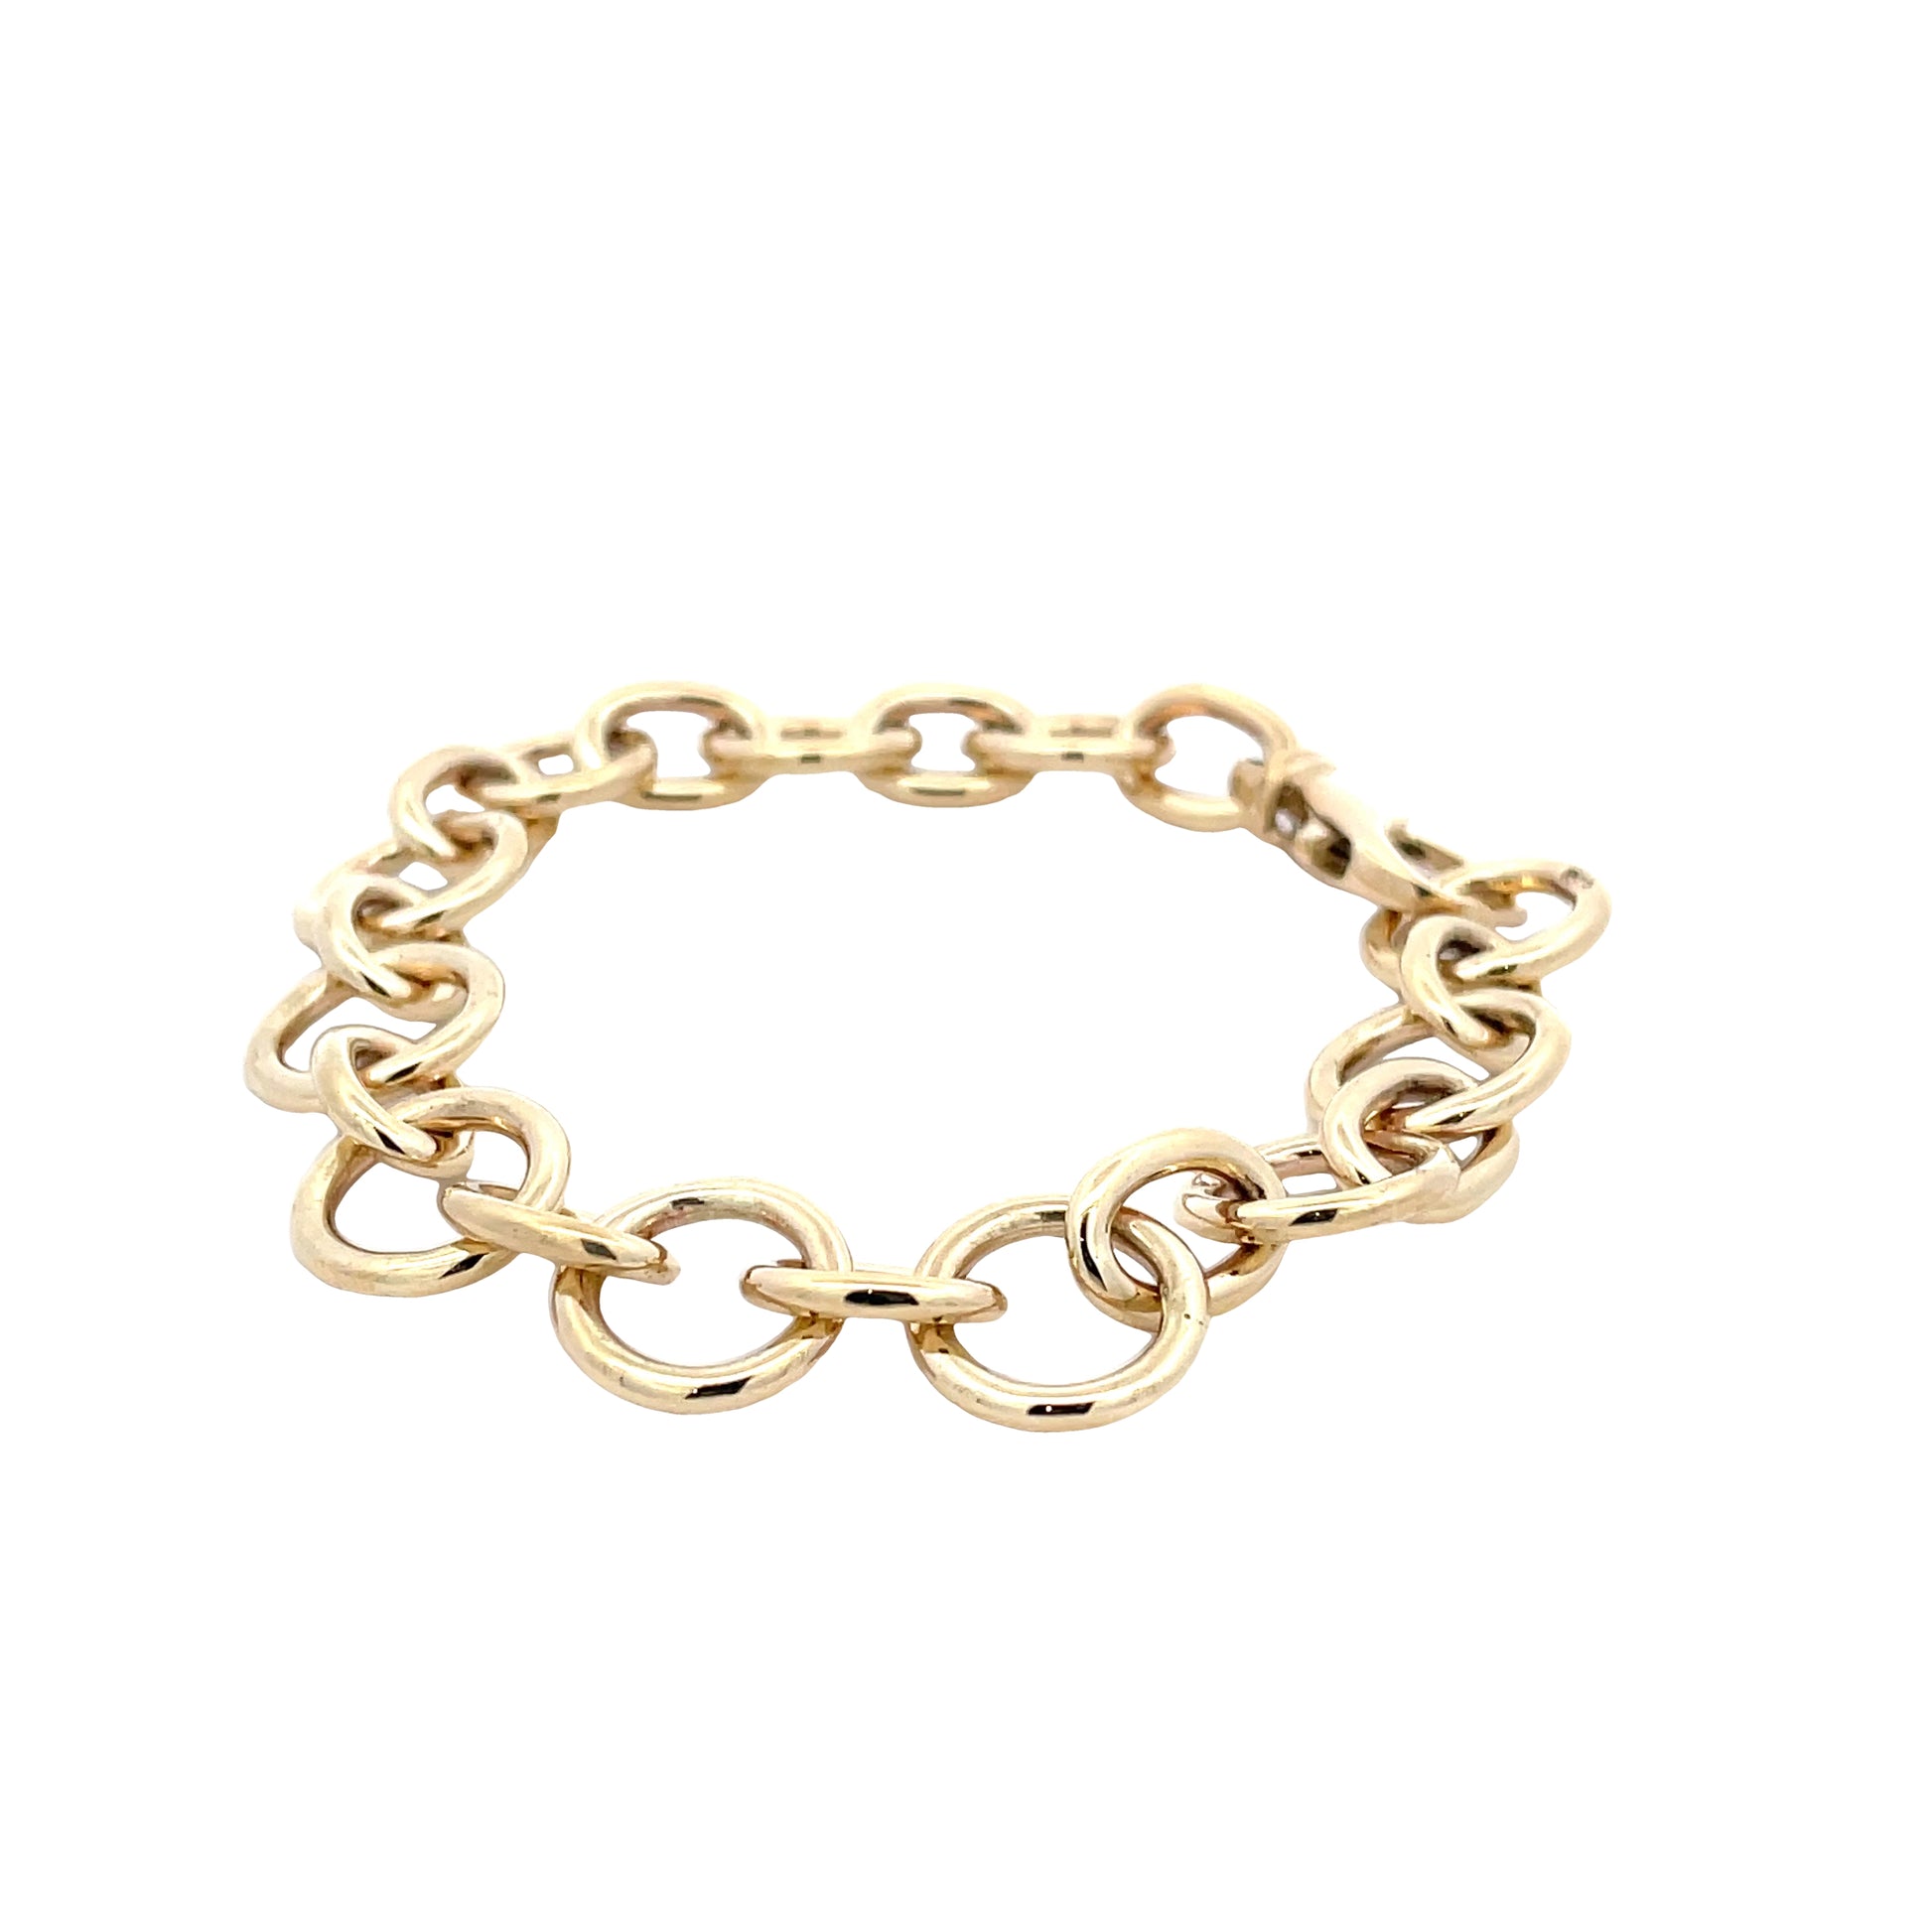 Yellow gold wide link style bracelet  Gardiner Brothers   